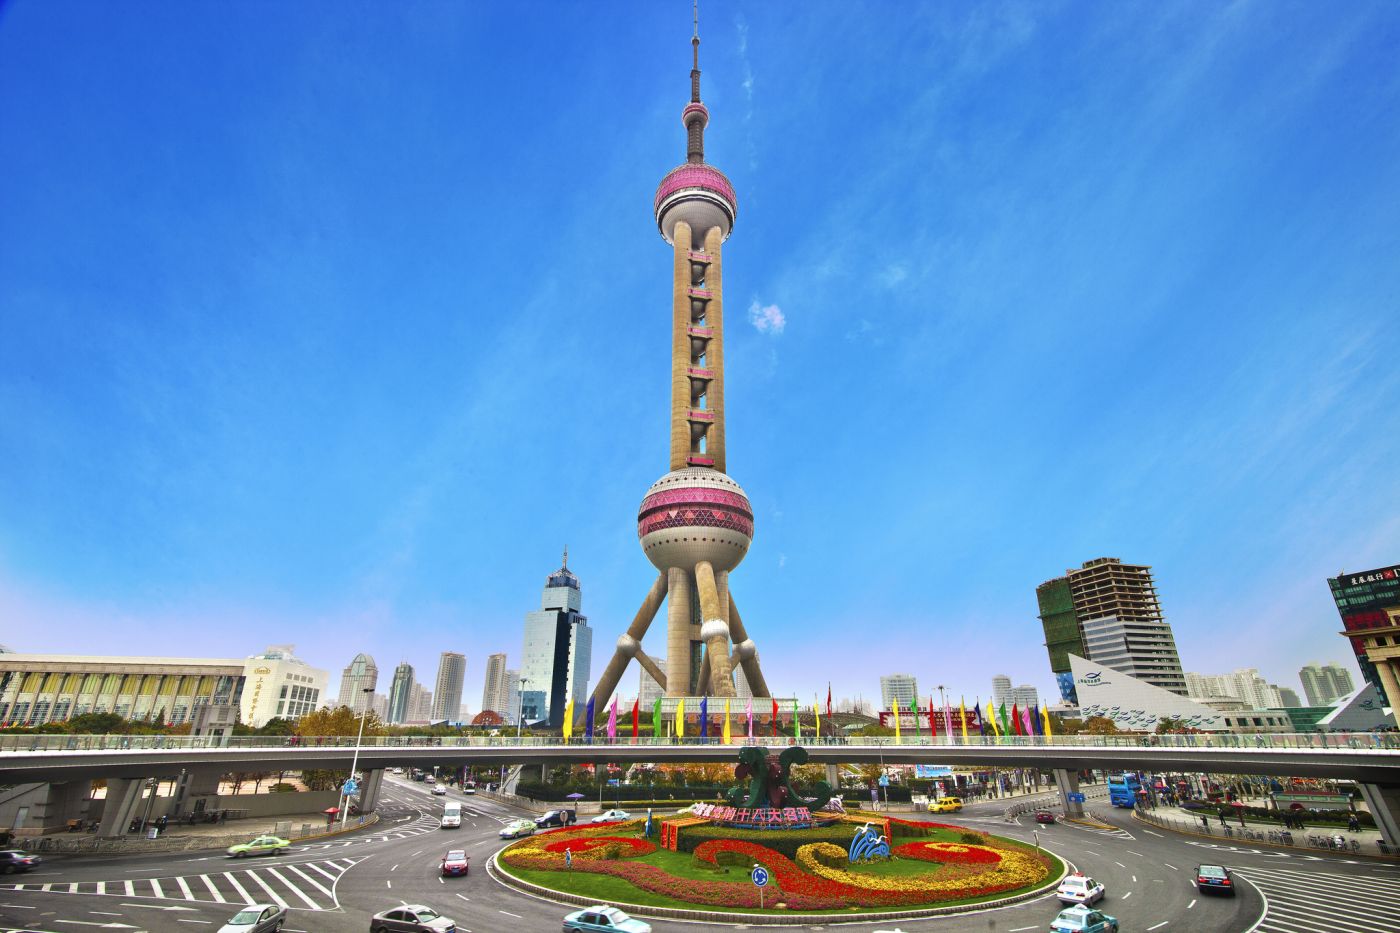 The Oriental Pearl Tower in China is the Fifth Tallest Tower in the World!